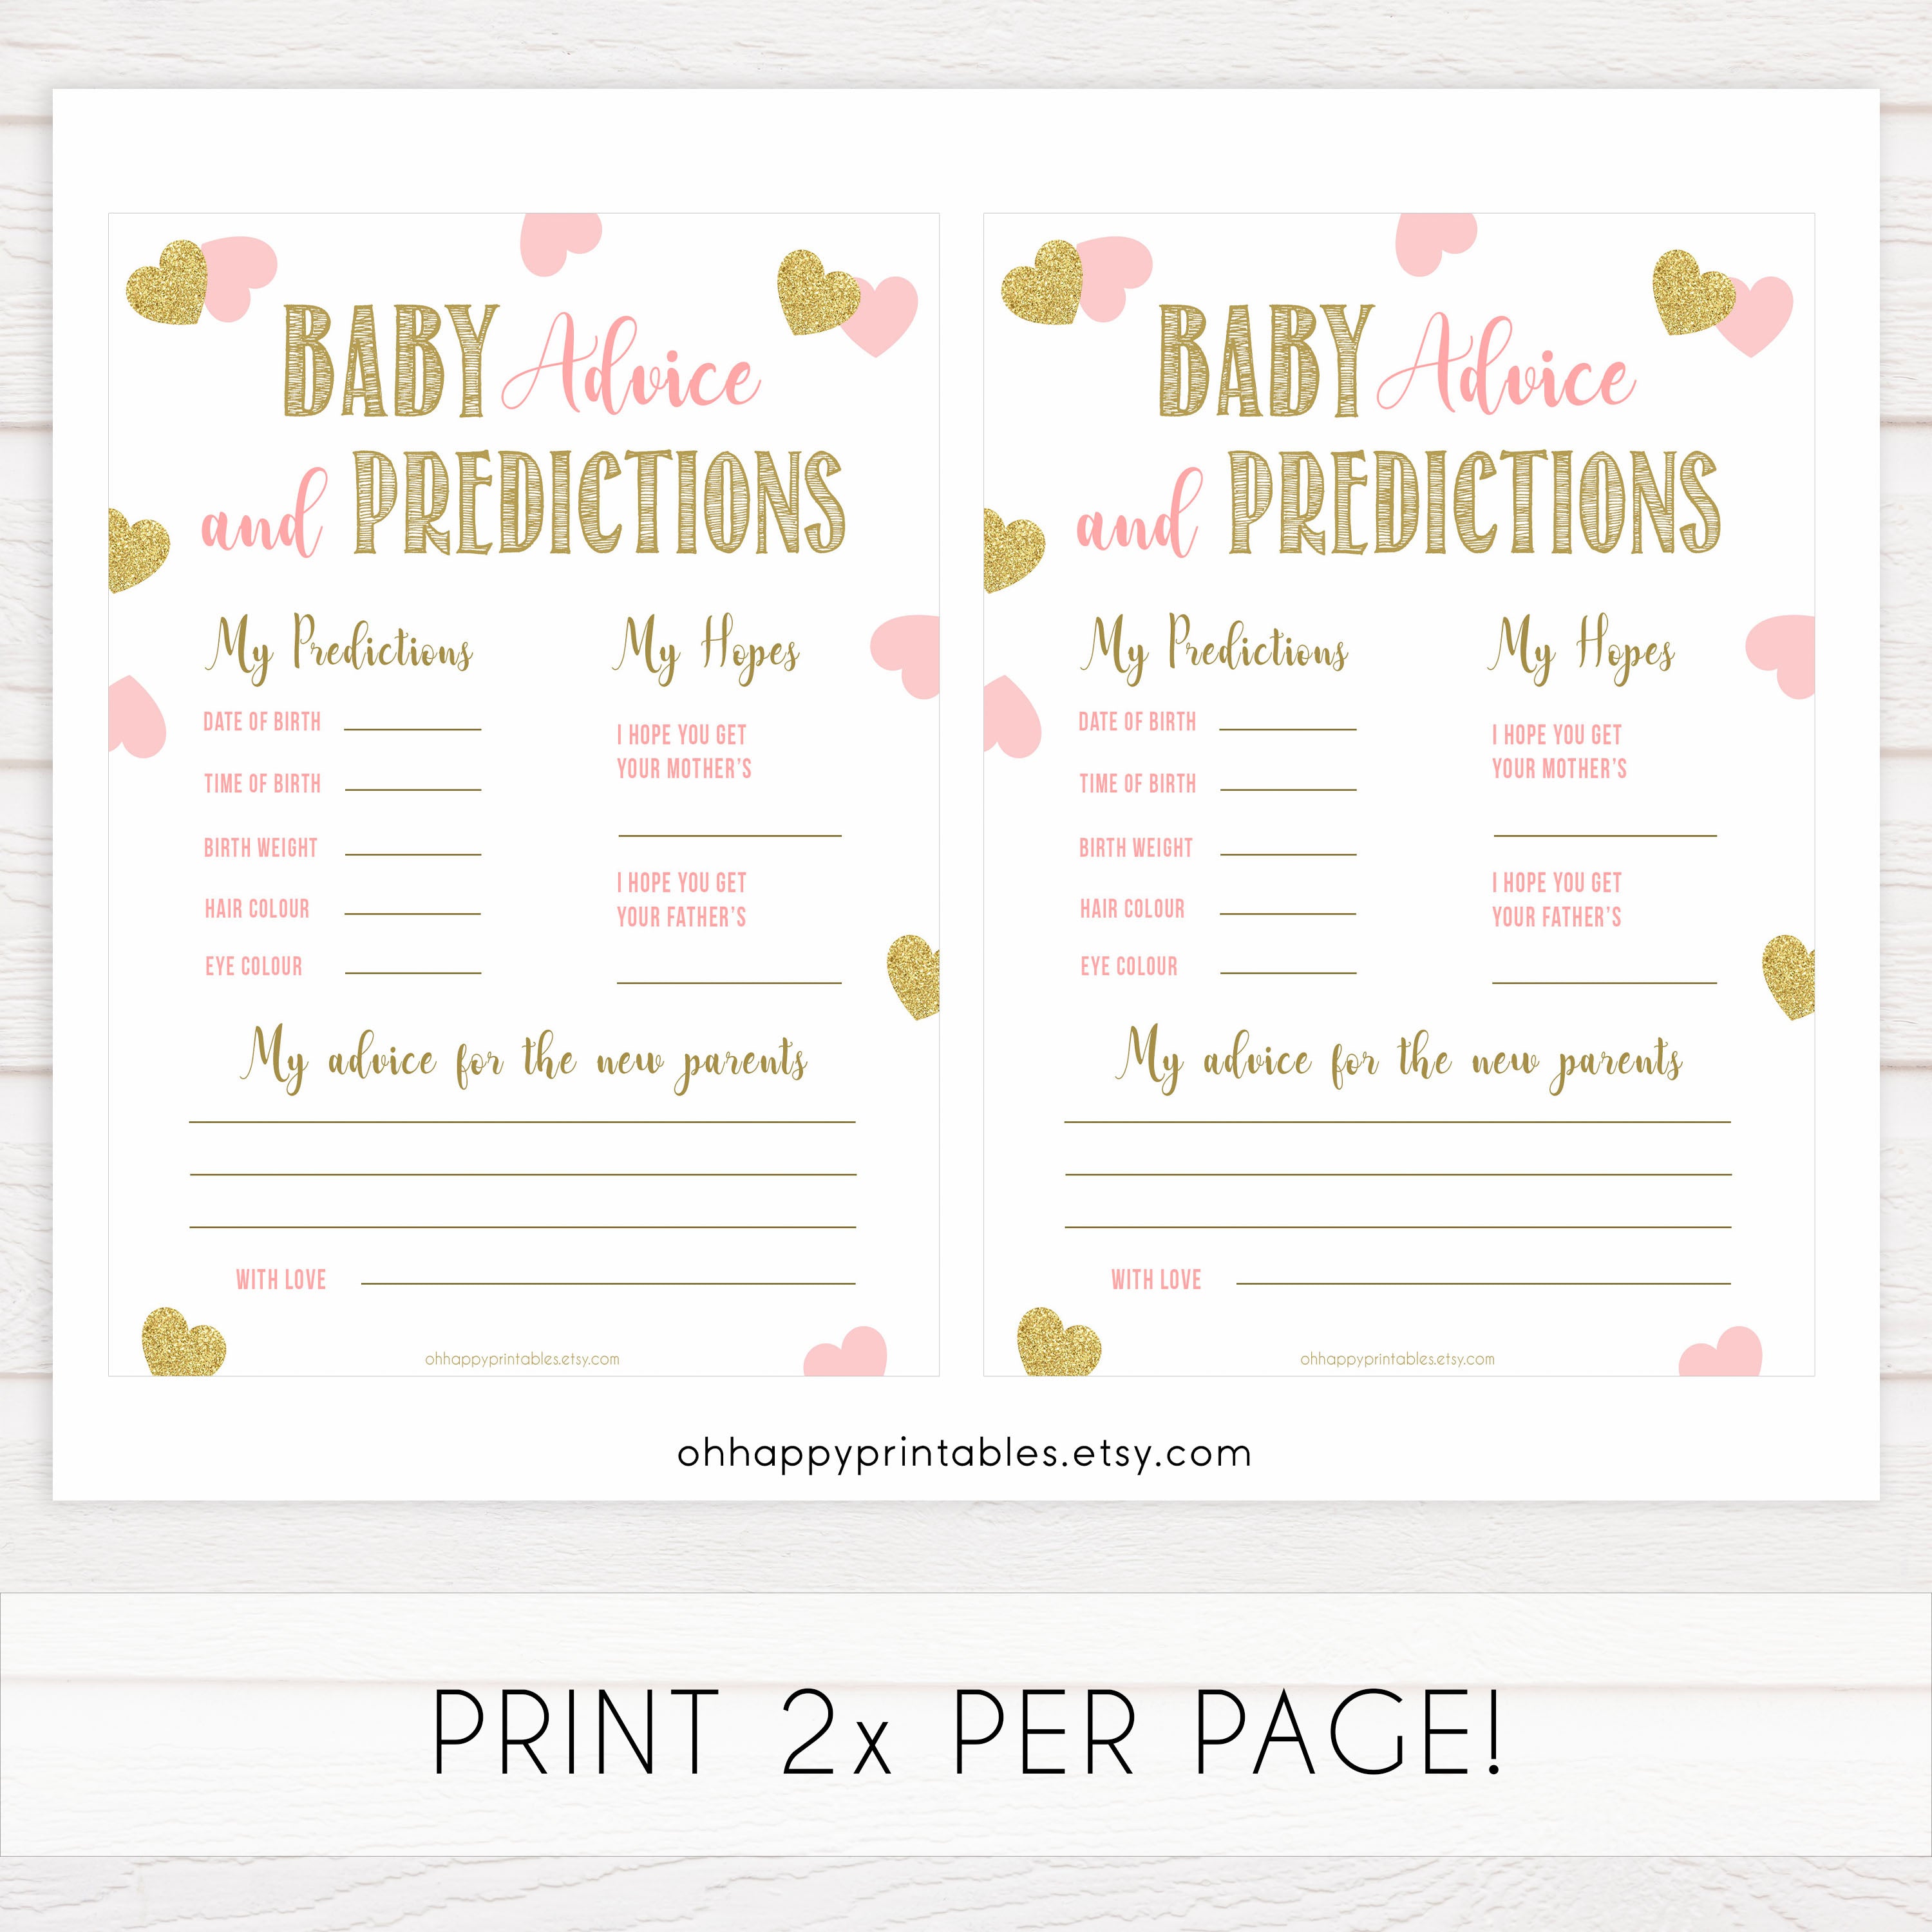 baby advice and predictions keepsake, baby advice, Printable baby shower games, large pink hearts fun baby games, baby shower games, fun baby shower ideas, top baby shower ideas, gold pink hearts shower baby shower, pink hearts baby shower ideas